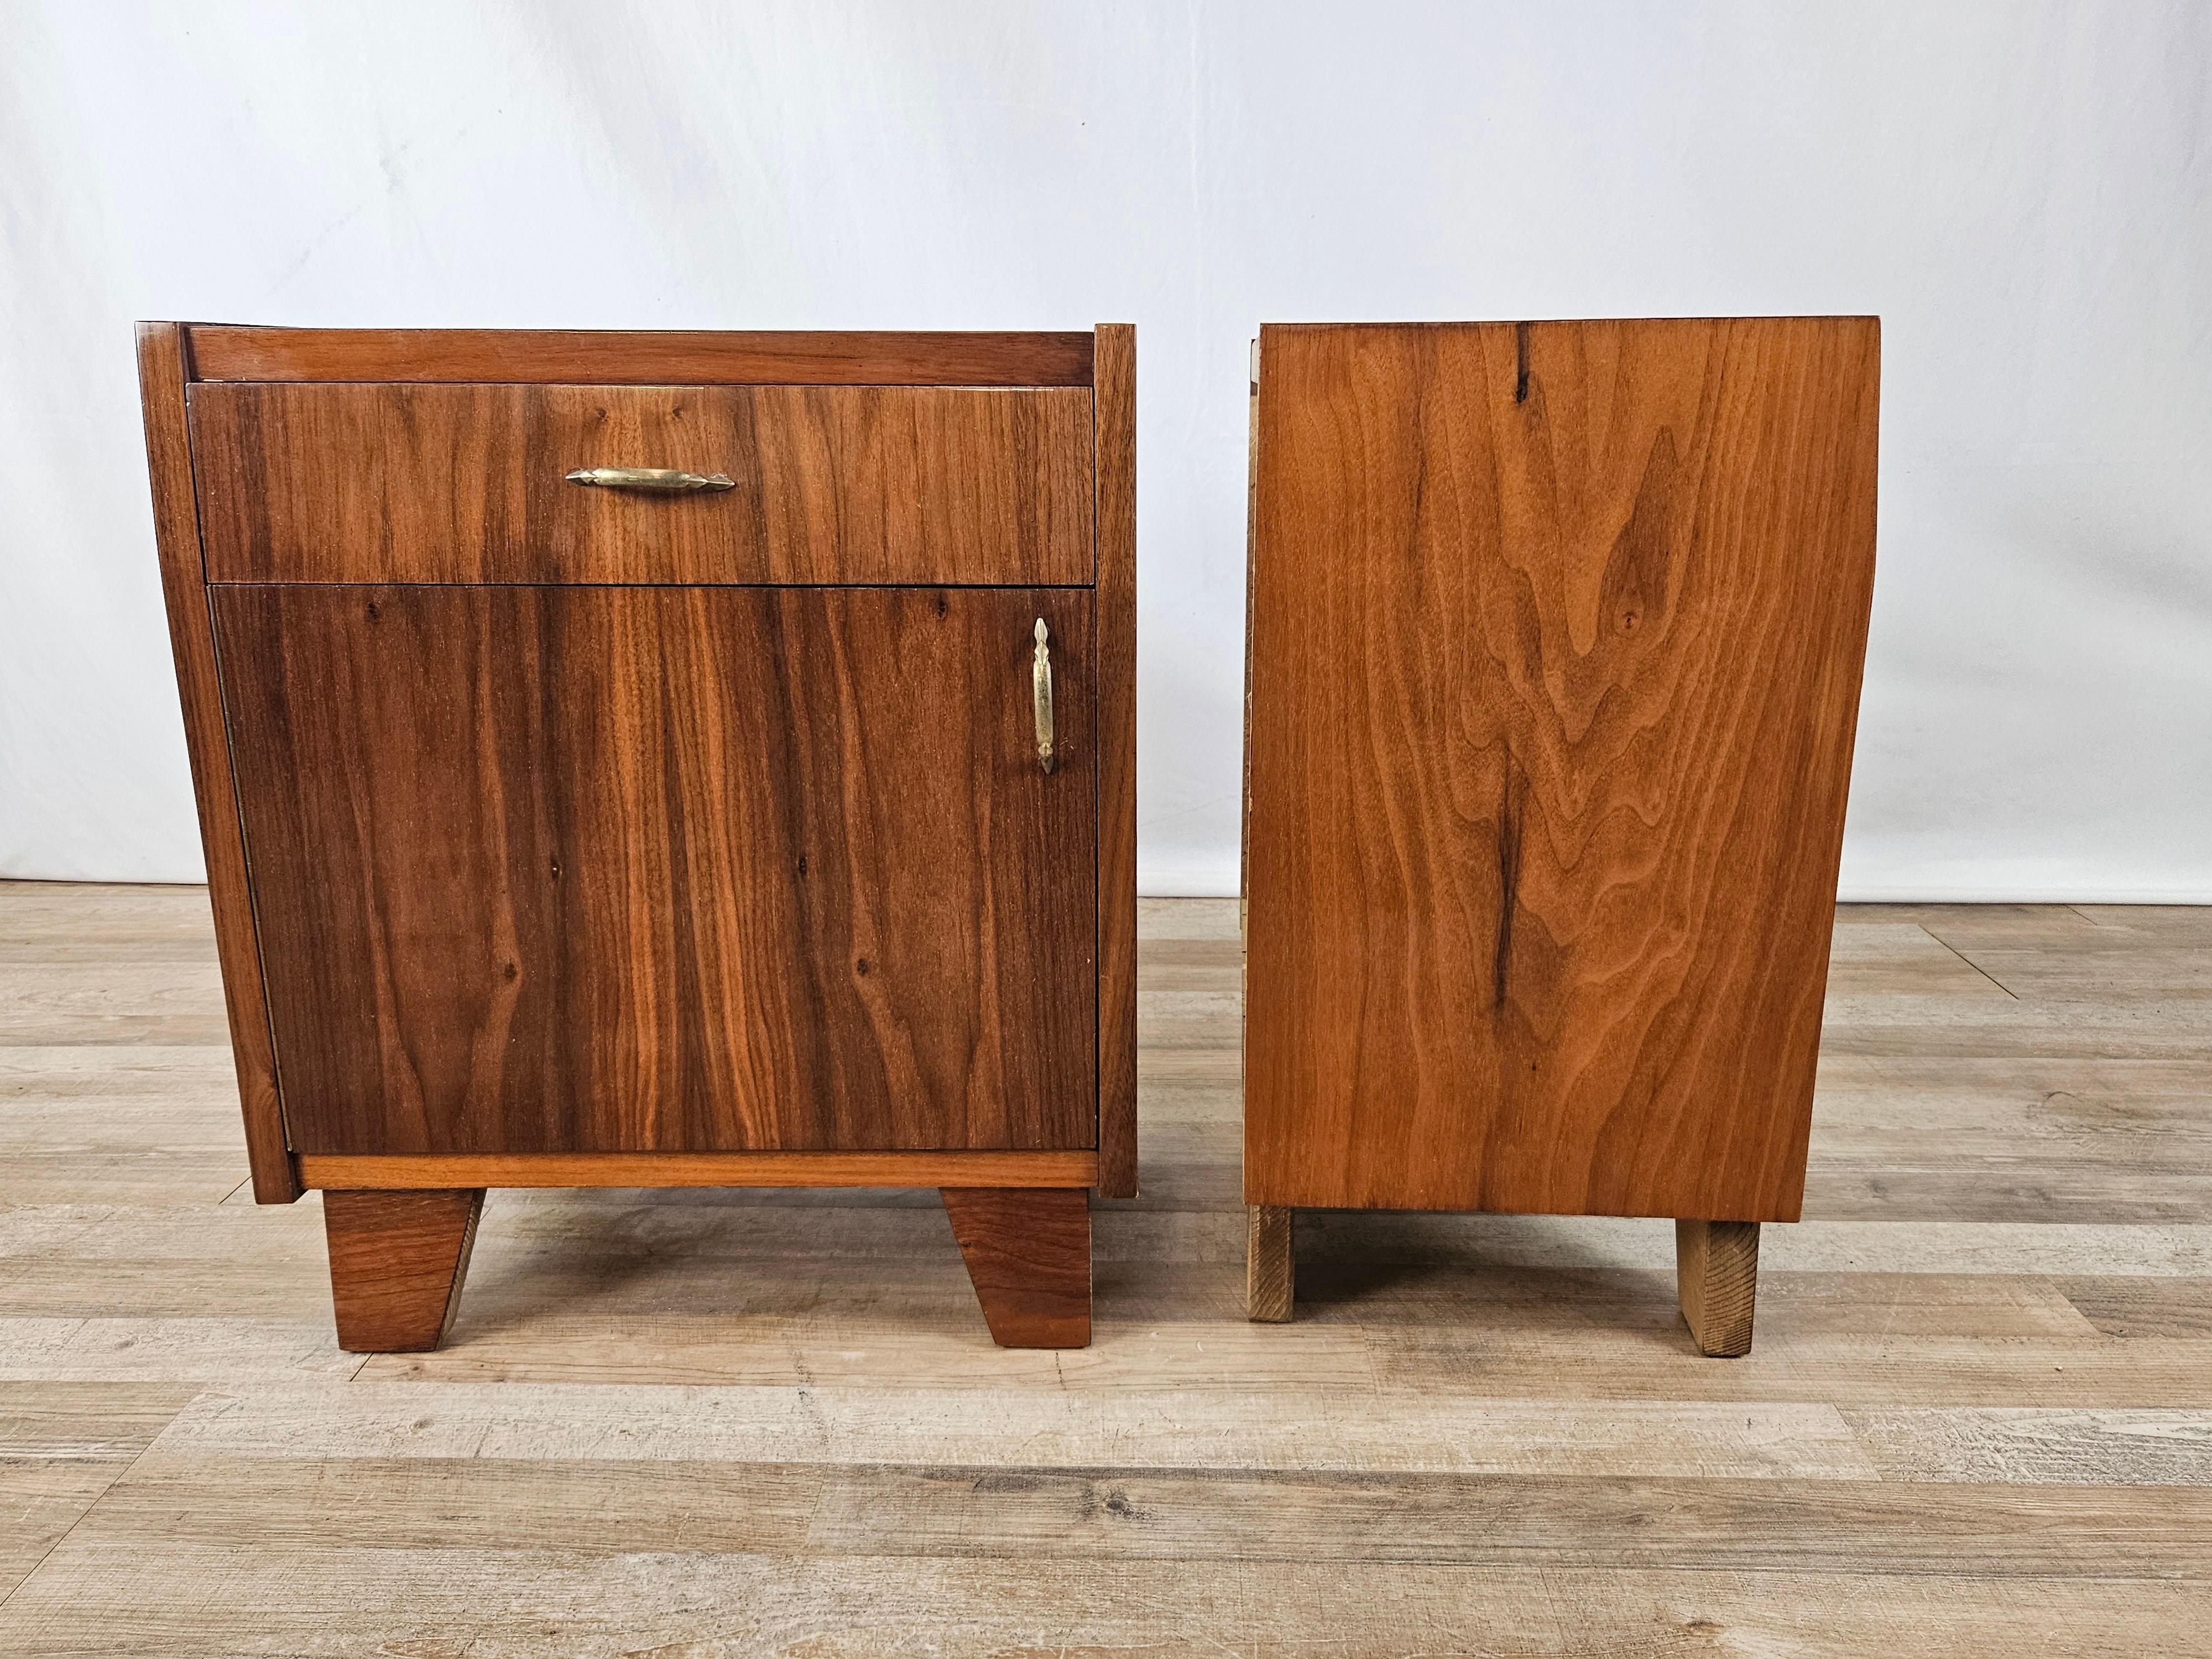 Italian-made 1950s Mid Century nightstands in polished walnut, fitted with drawer and door with interior compartment.

They show some signs of wear as pictured due to age and use.